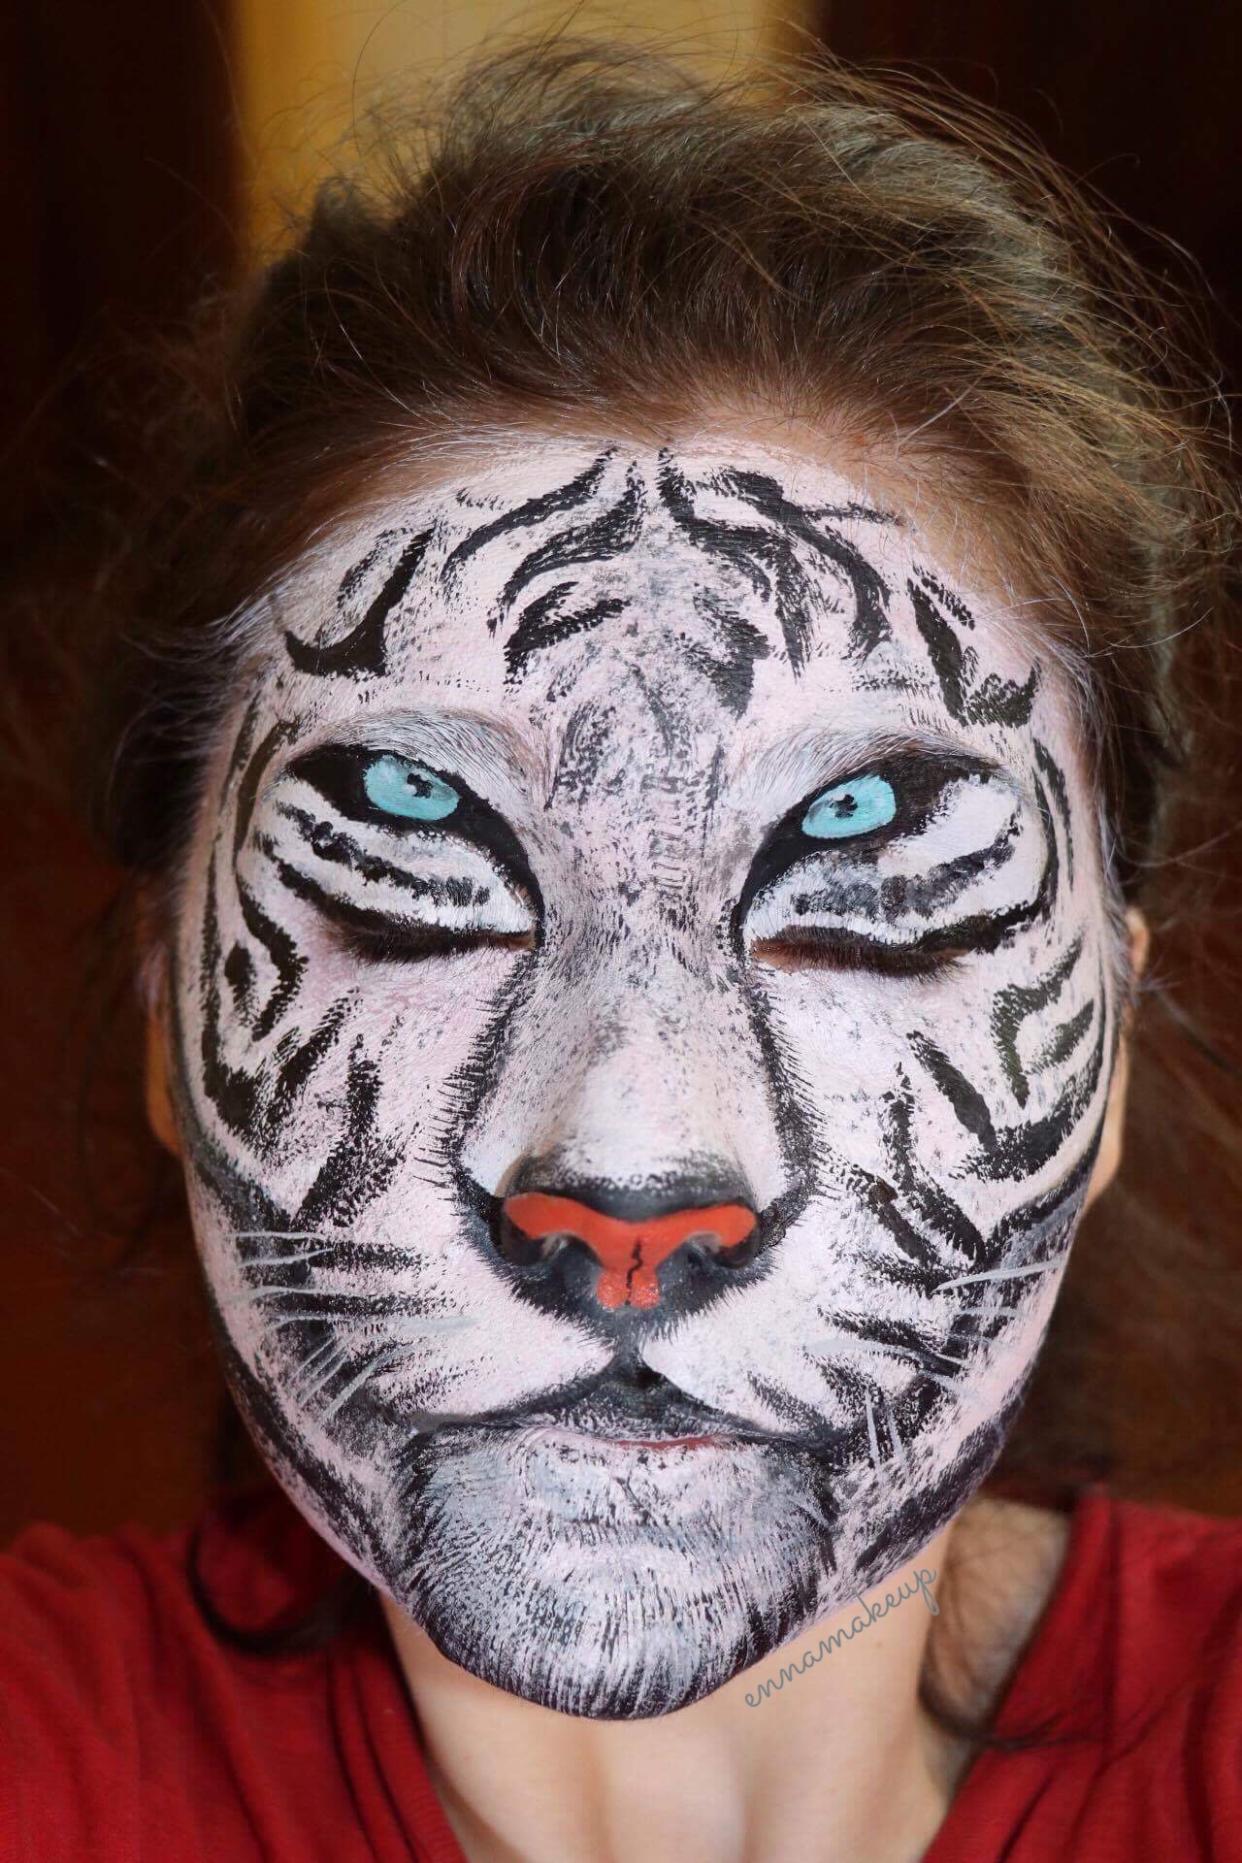 Elena Martini is a paraplegic face painter who has the skills to transform her face into anyone or anything she wants it to be. (Photo: Courtesy of Elena Martini)